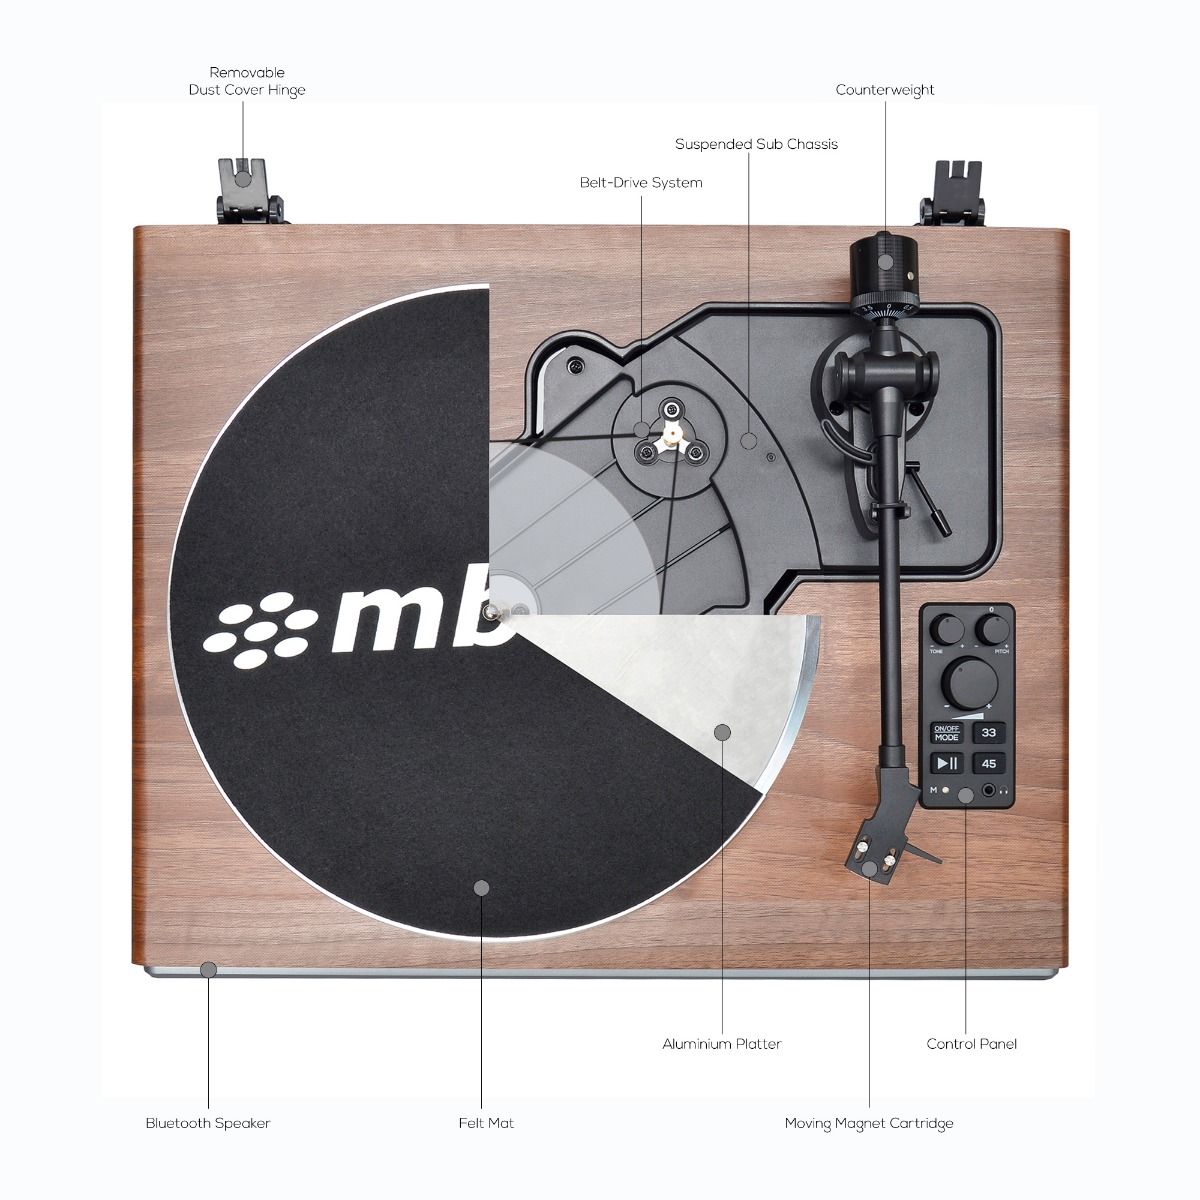 mbeat Hi-Fi Turntable with Built-In Bluetooth Receiving Speaker - image4